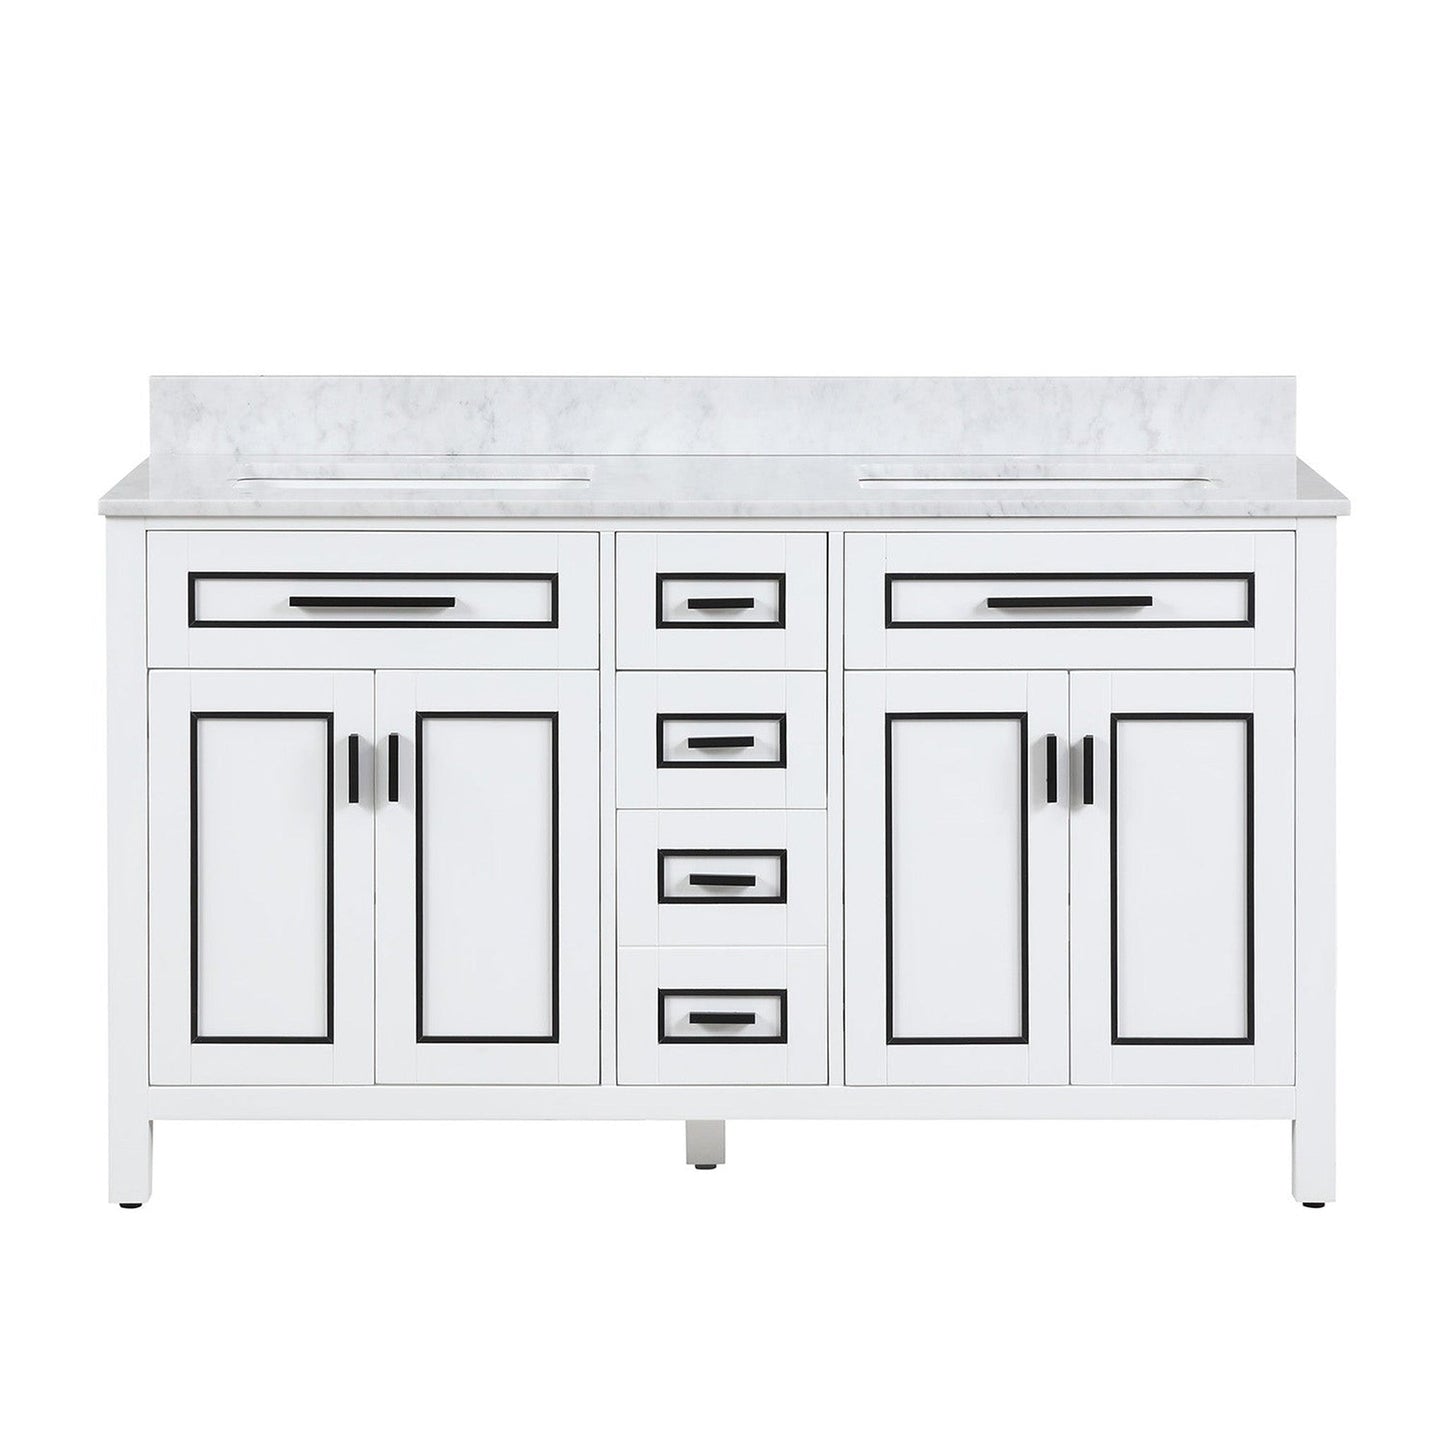 Duko Venice 60" With White Cararra Marble Tabletop, Rectangular Double Basin and Drawer Cabinet White Wooden Vanity Set